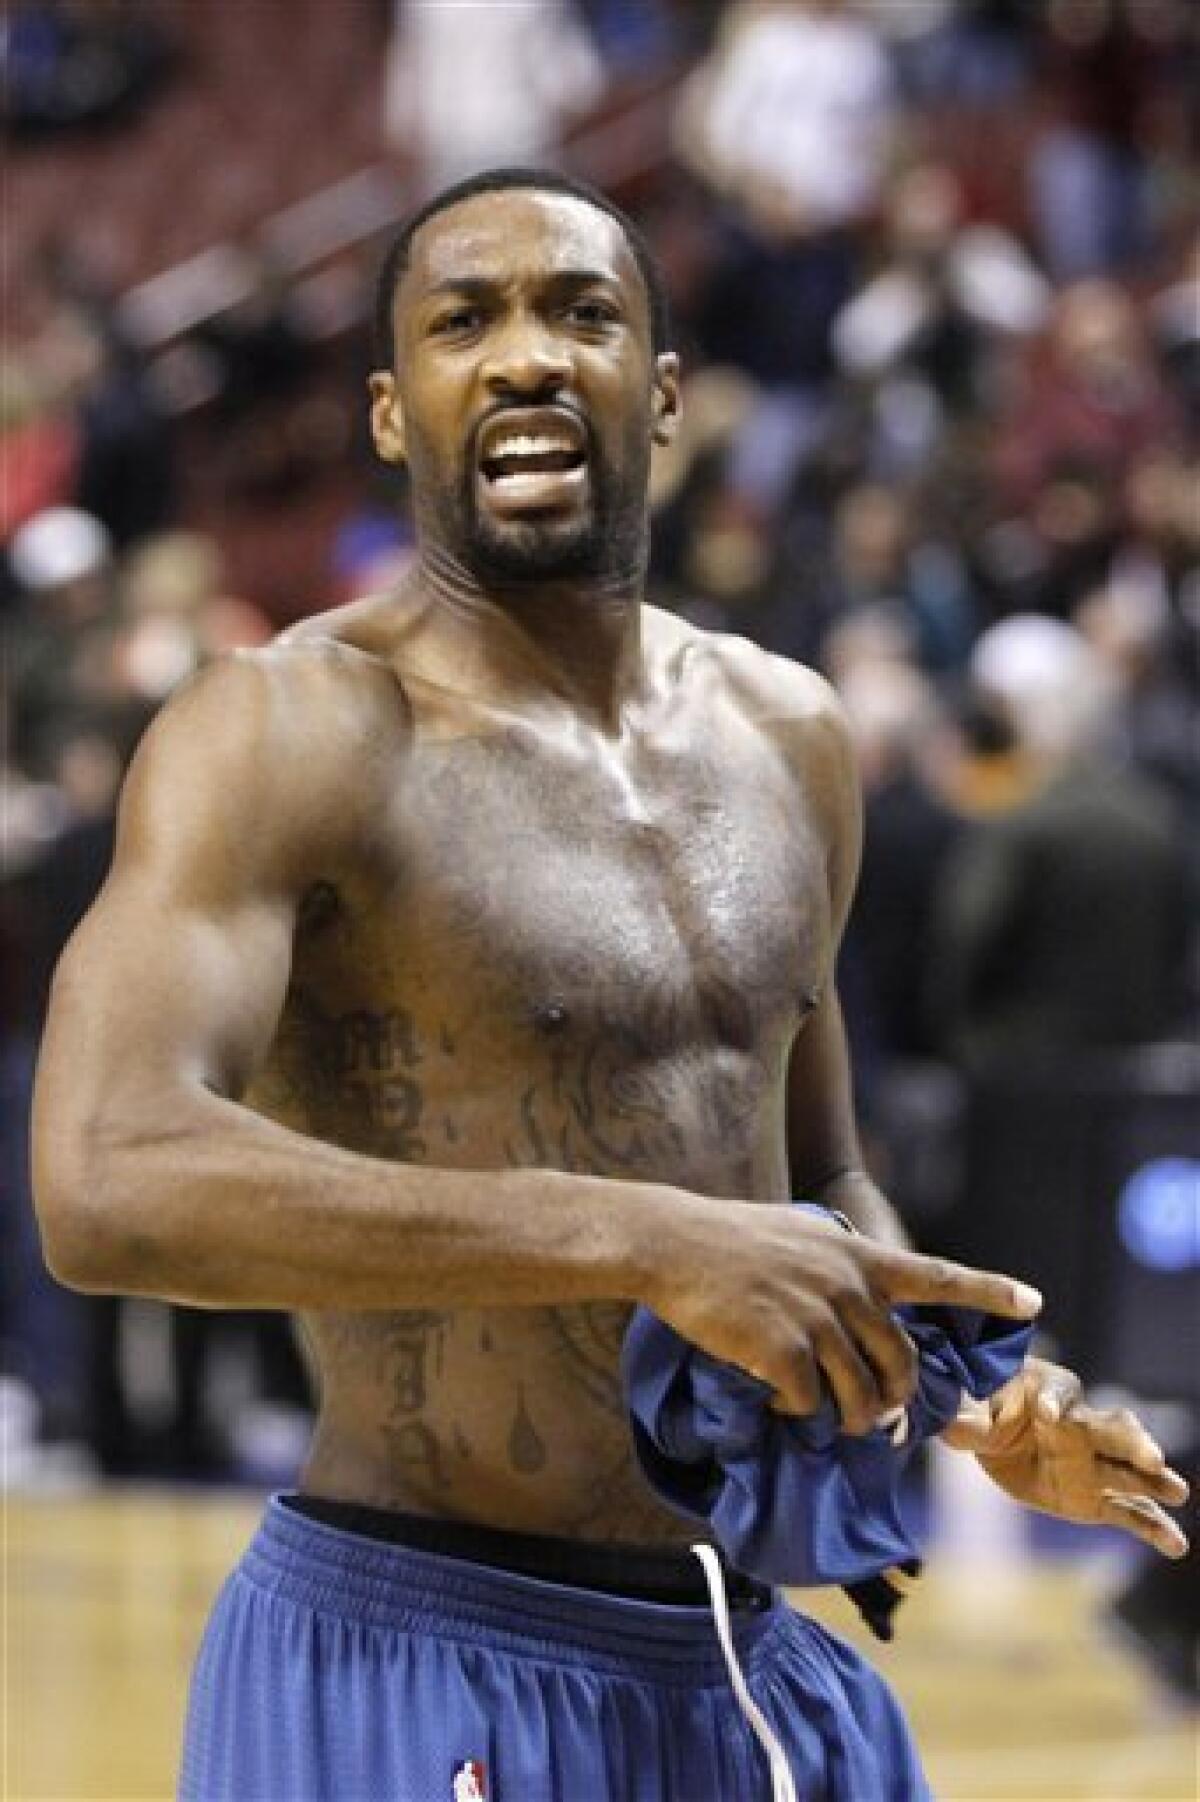 Gilbert Arenas got serious razor burn first time he shaved his groin area